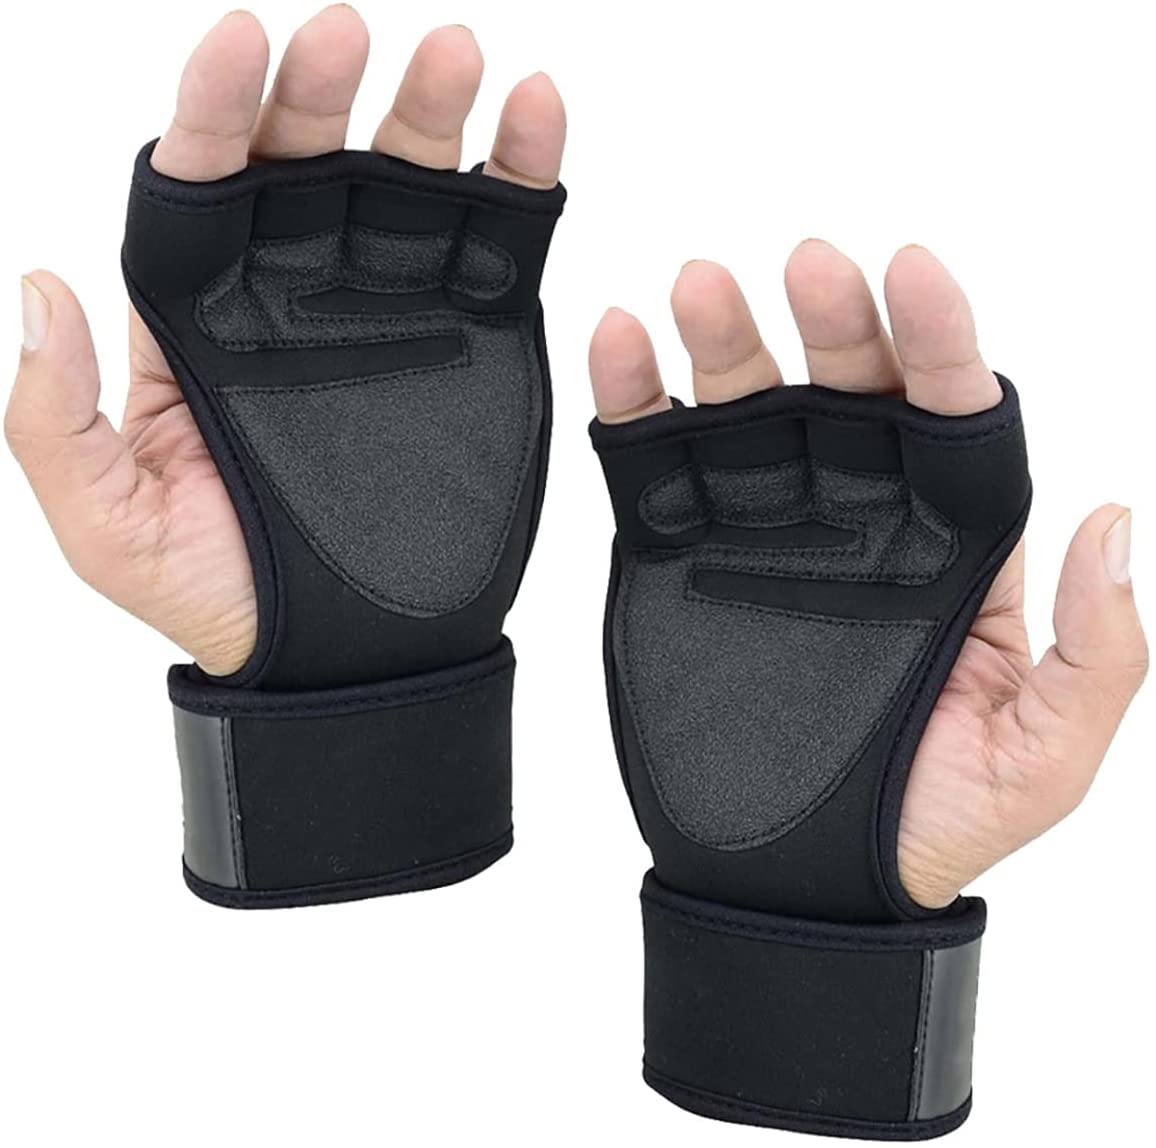 Buy Gym Gloves with Wrist Support Long Strap for Training Men